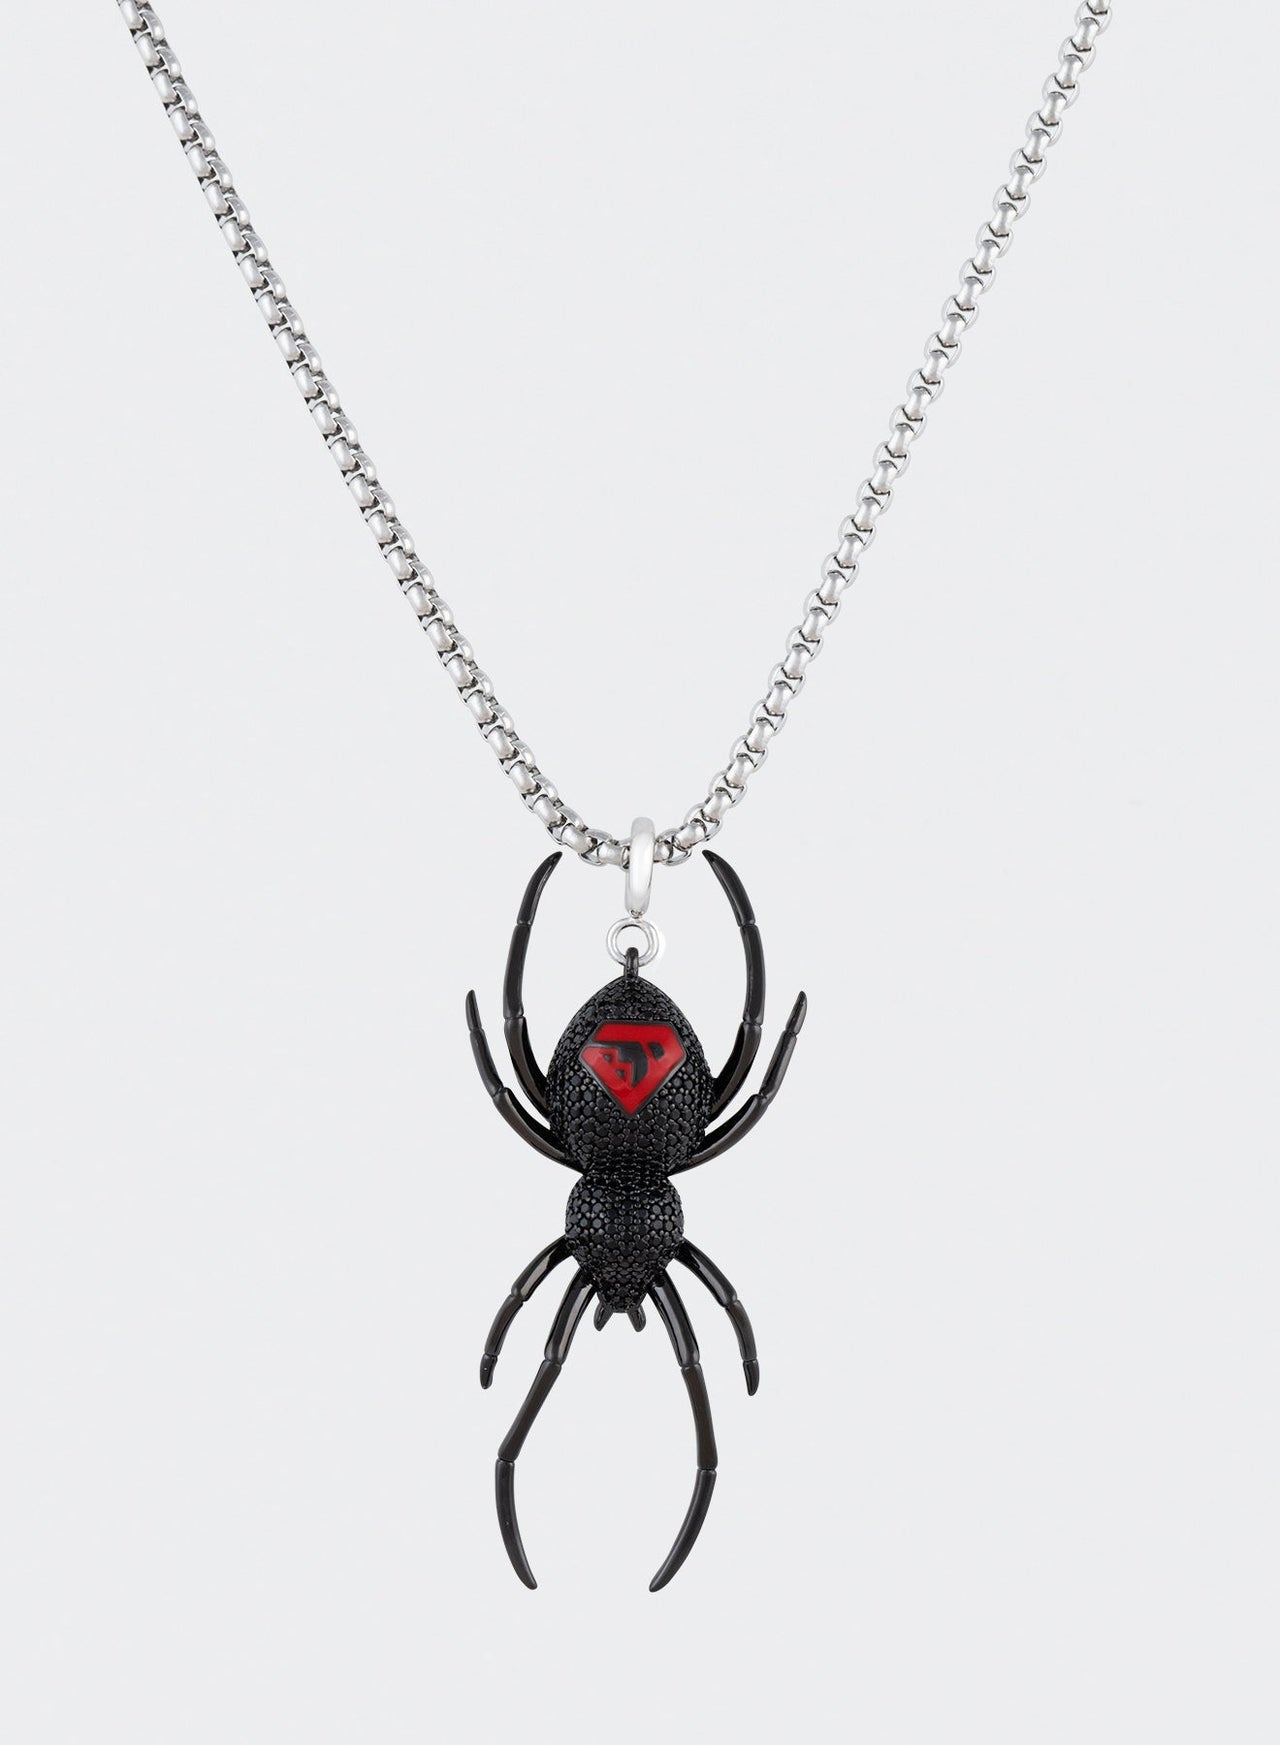 Black PVD coated black widow pendant necklace with hand-set micropavé stones in black, metal details, red enamel finishing and 3mm box chain